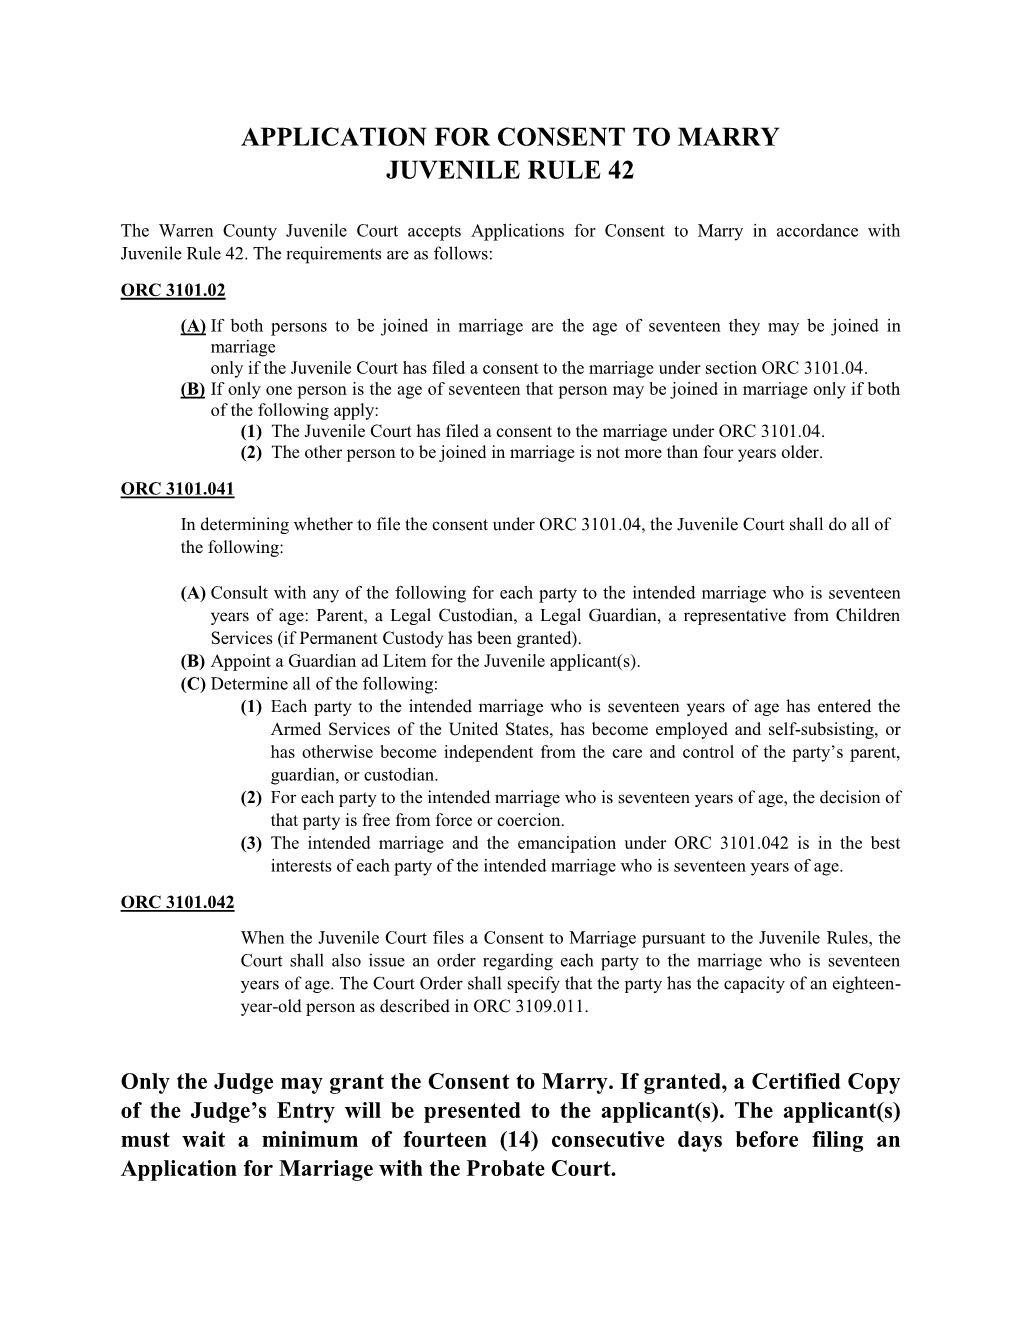 Application for Consent to Marry Juvenile Rule 42